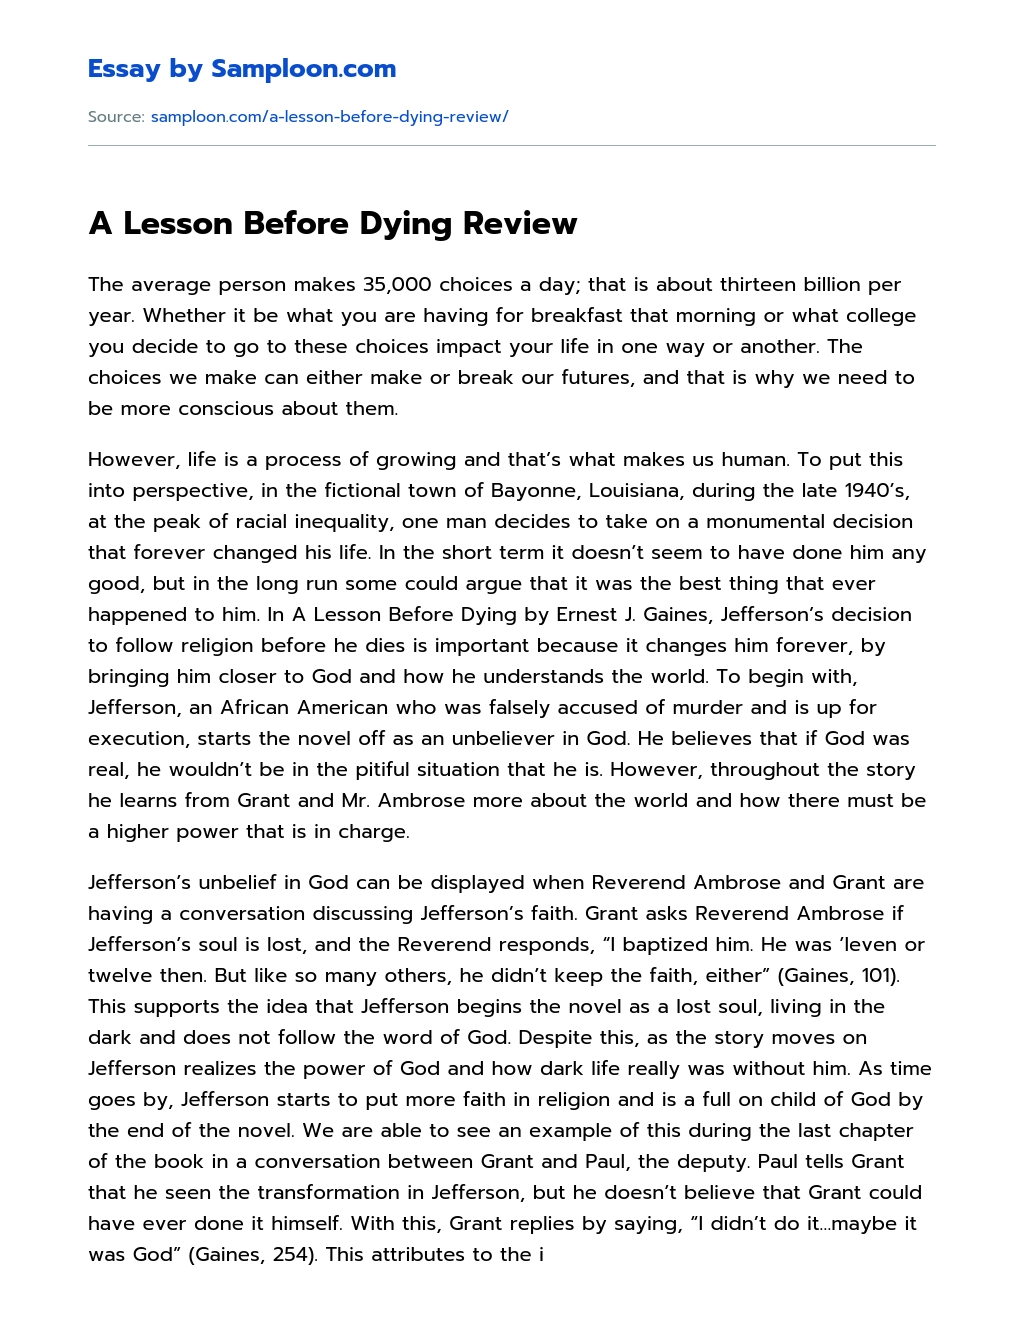 A Lesson Before Dying Review essay